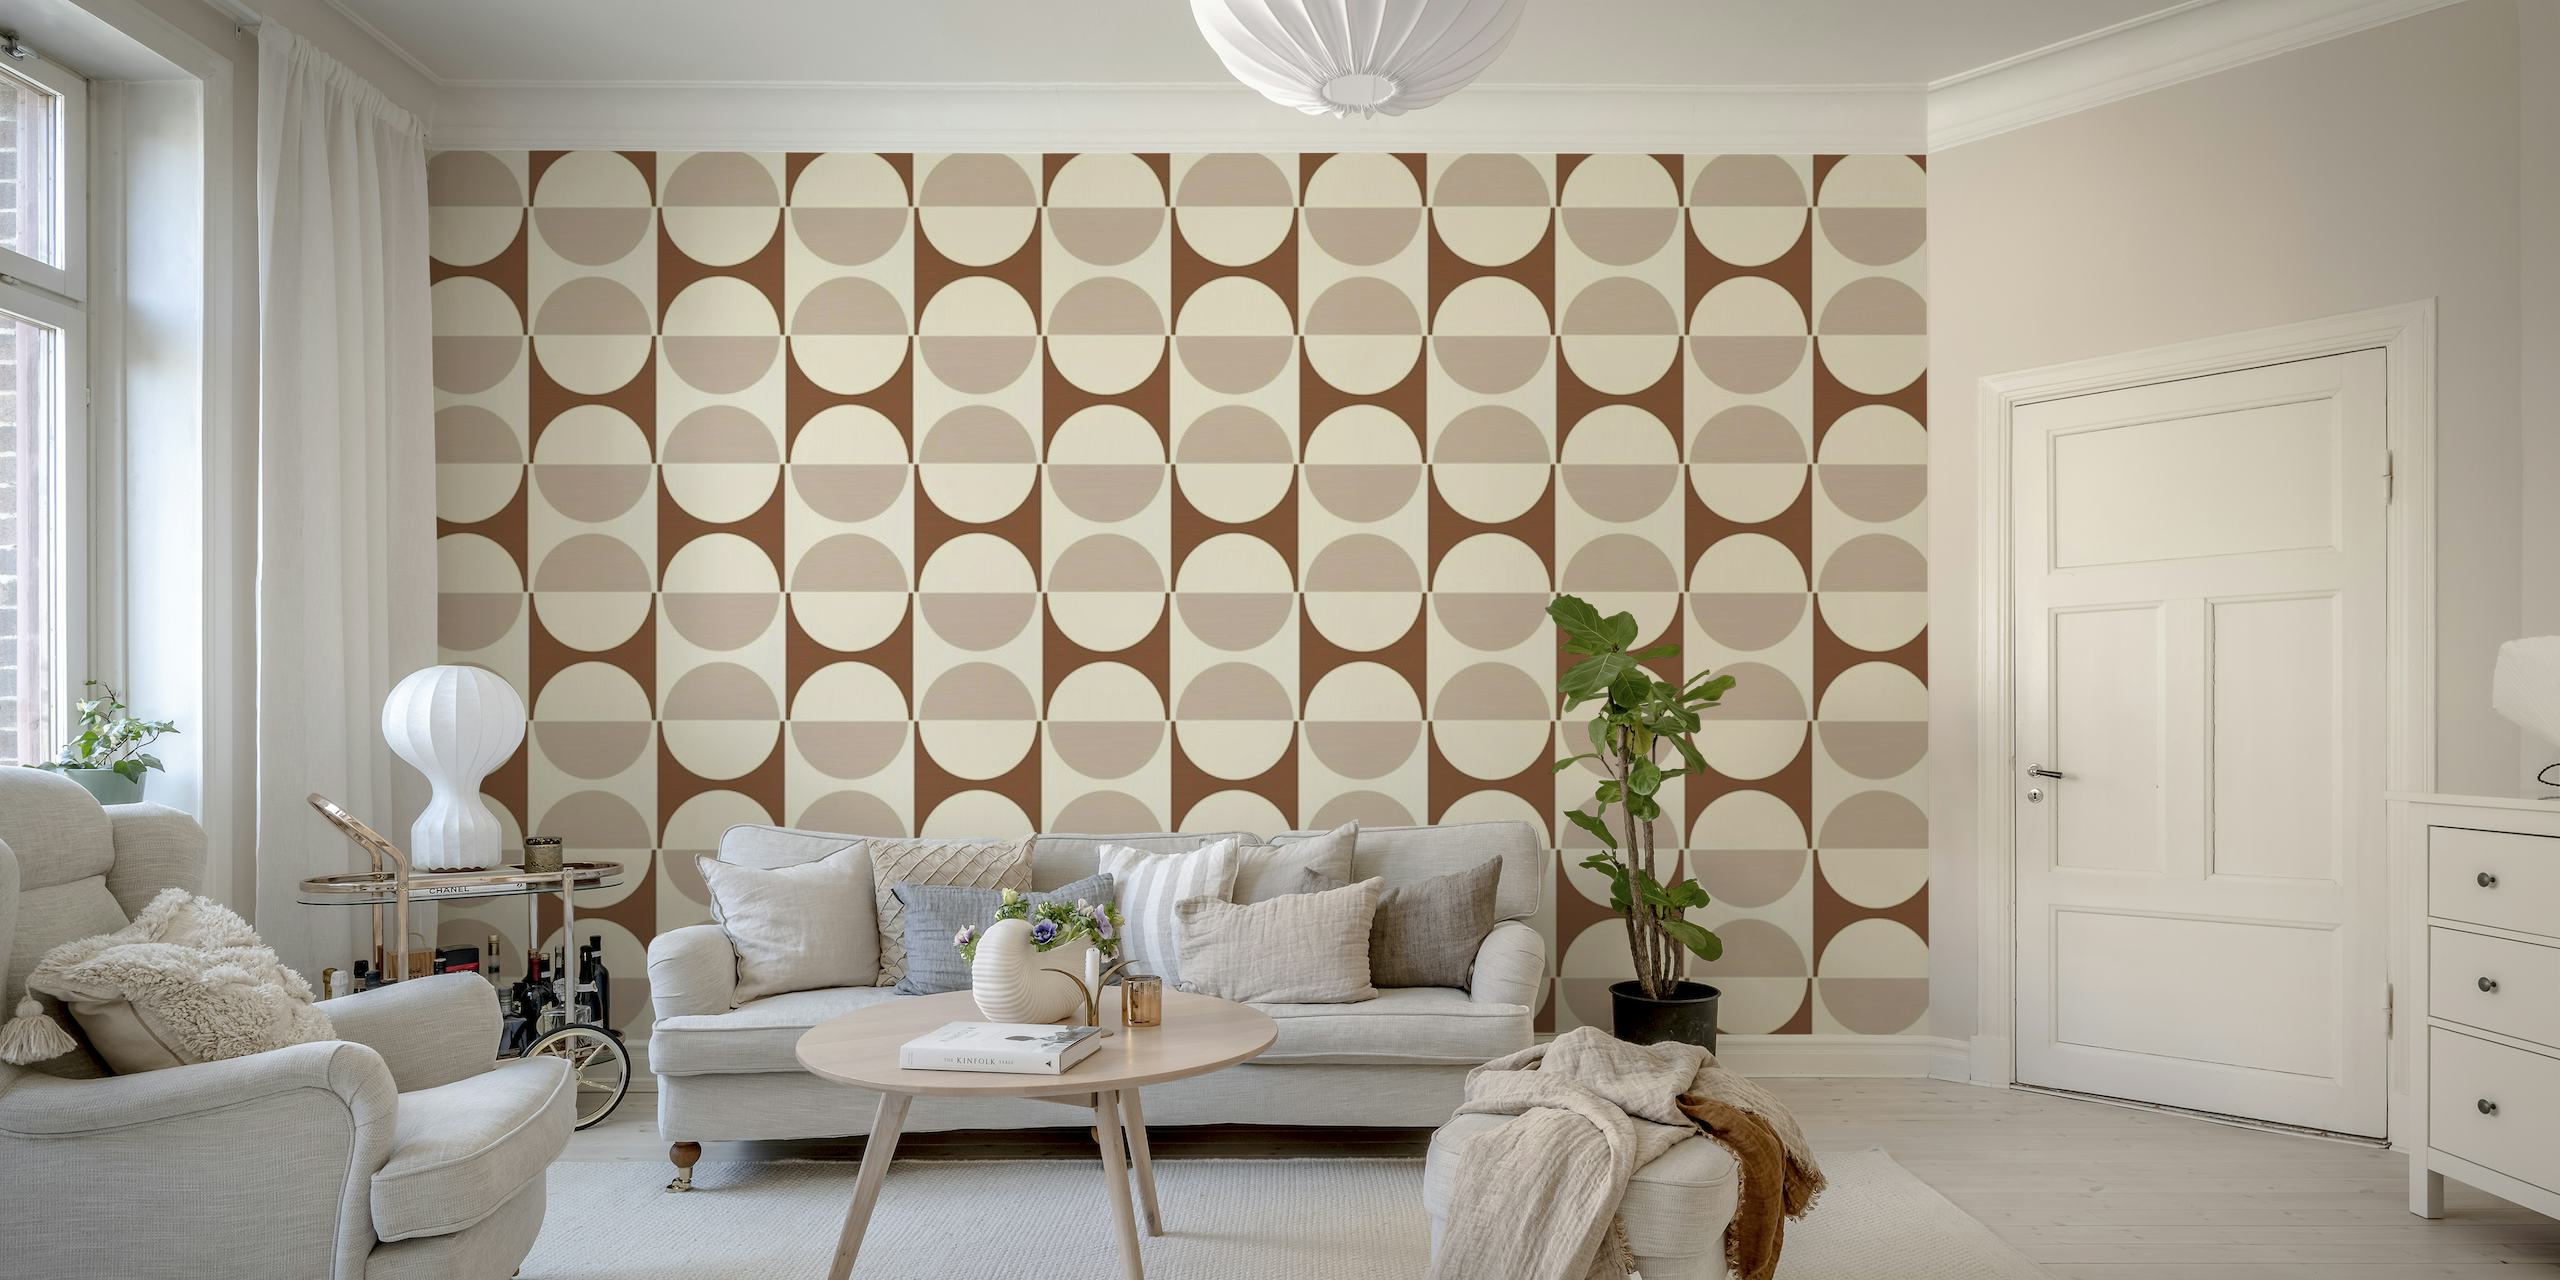 Semi-circular painted cotto tiles pattern in cream and powder colors